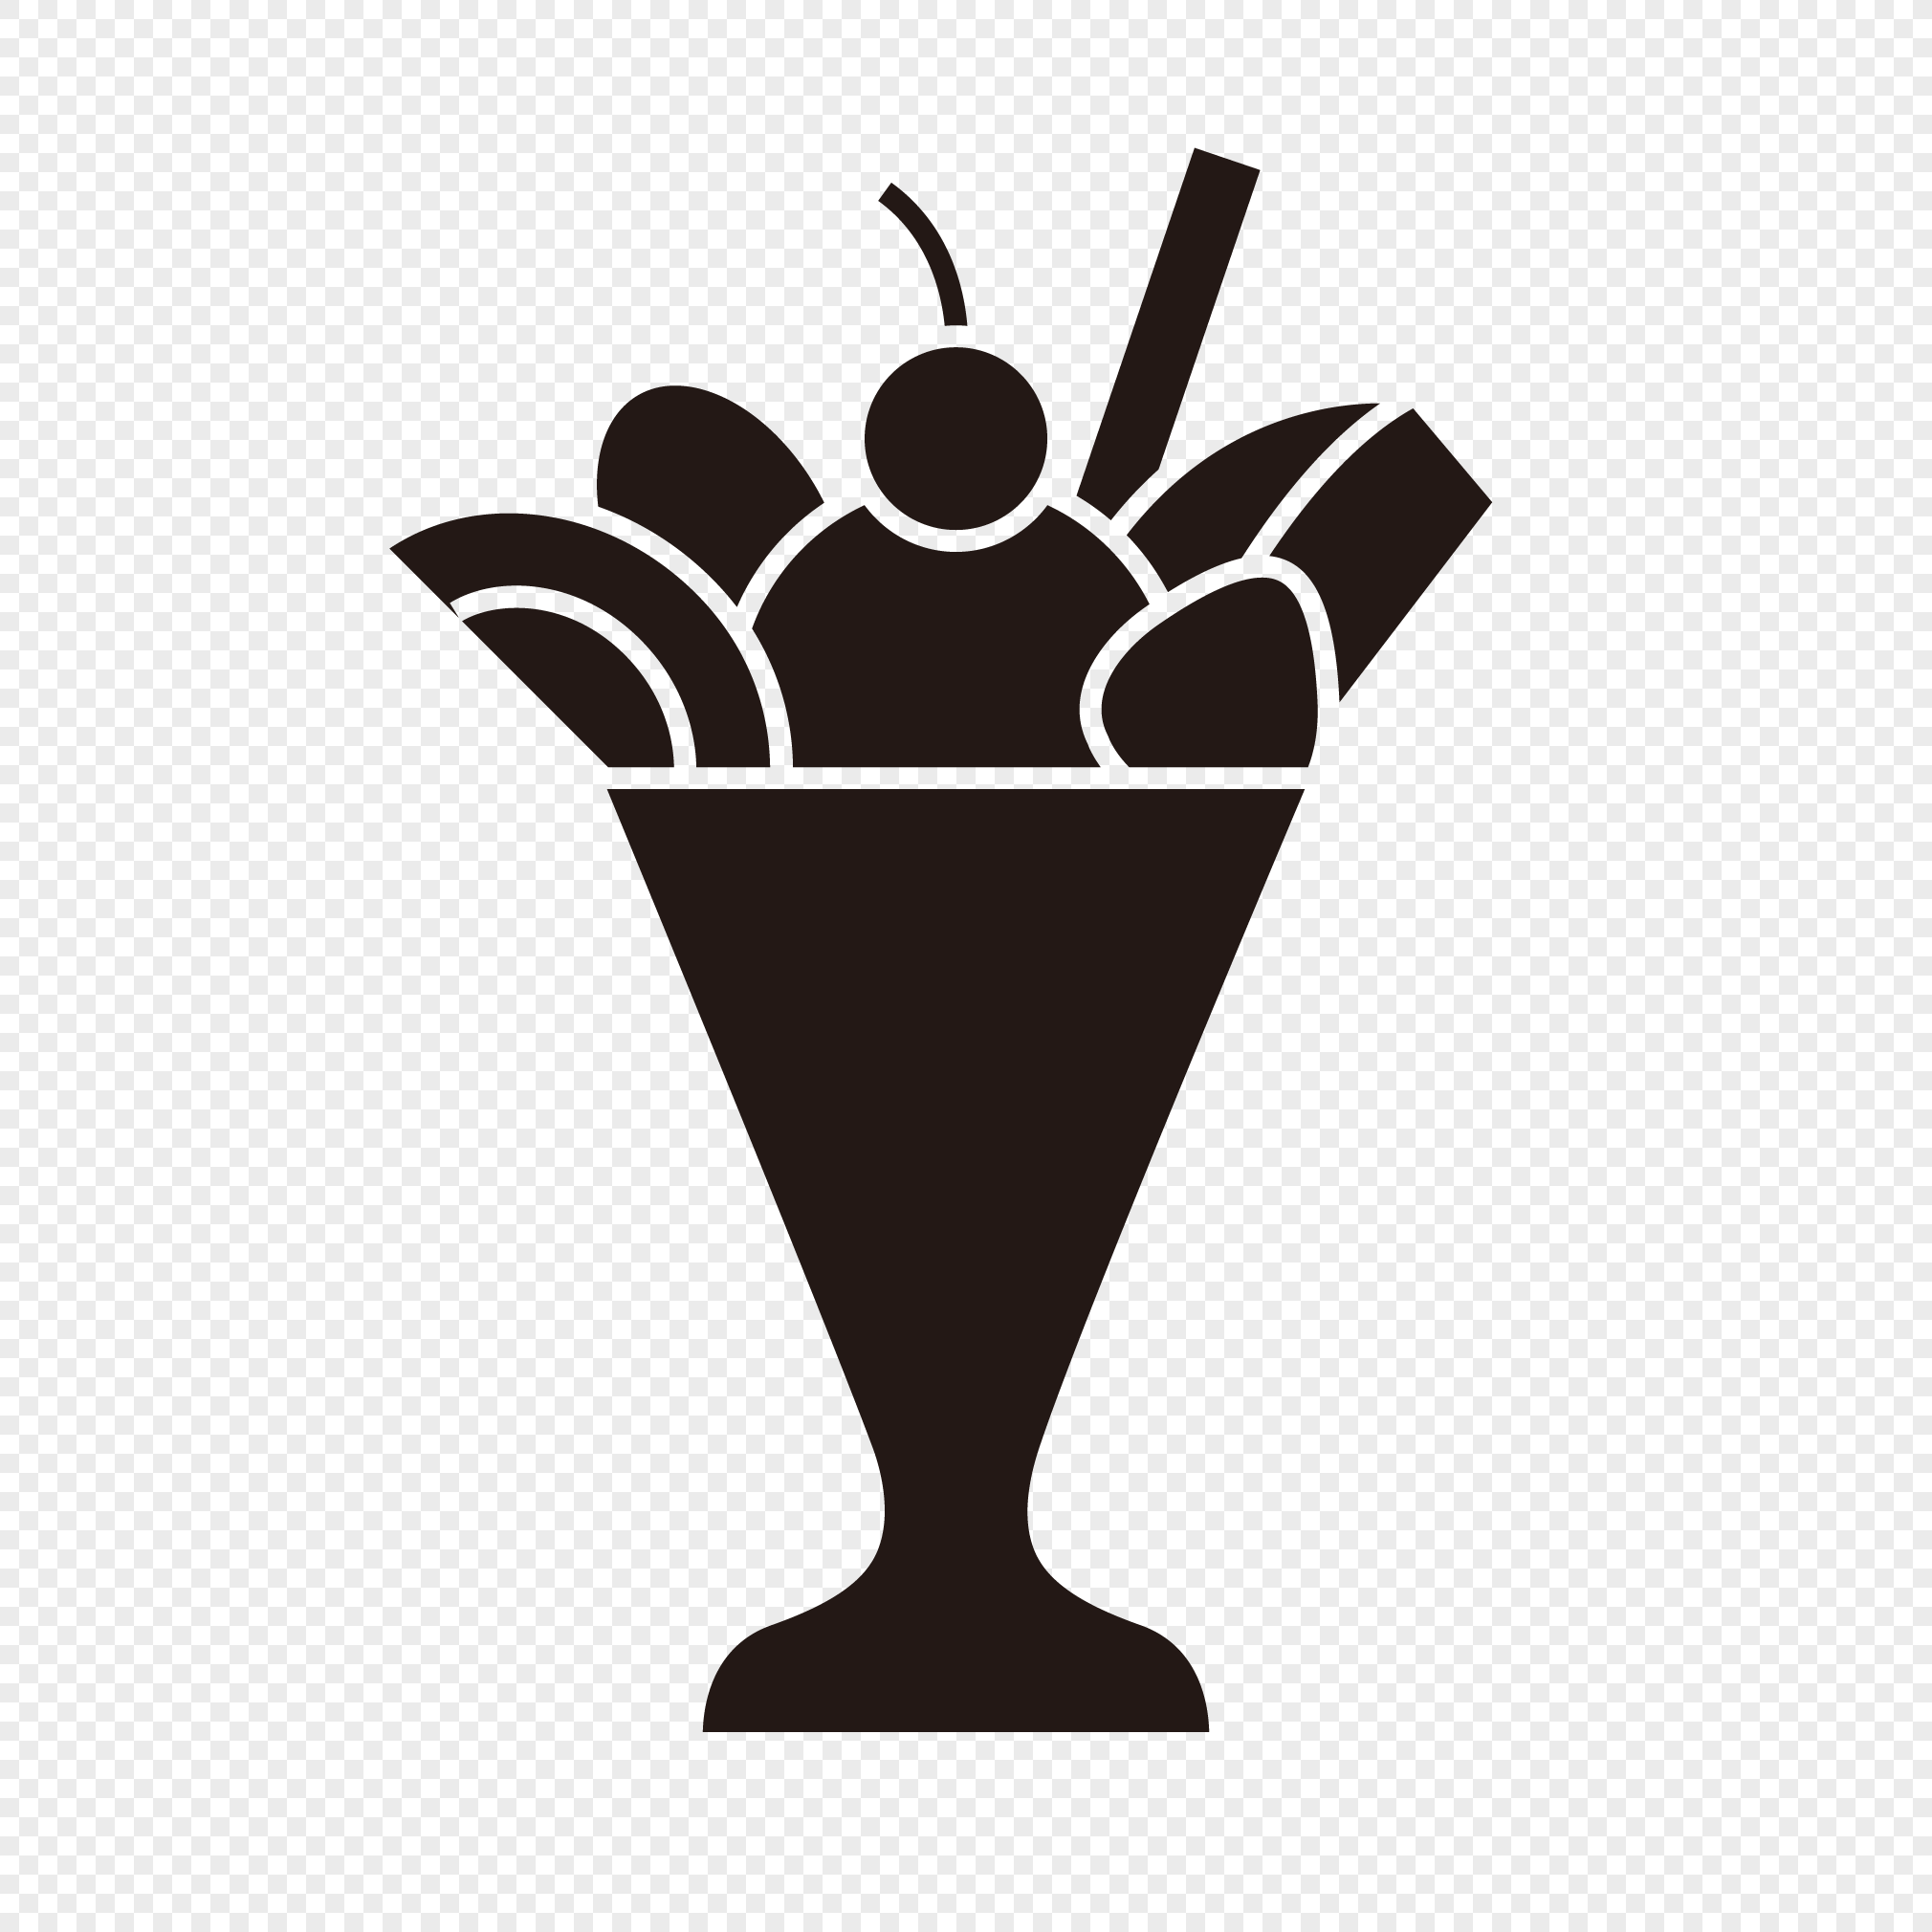 Black Ice Cream Logo - Food and gourmet black ice cream icon png image_picture free